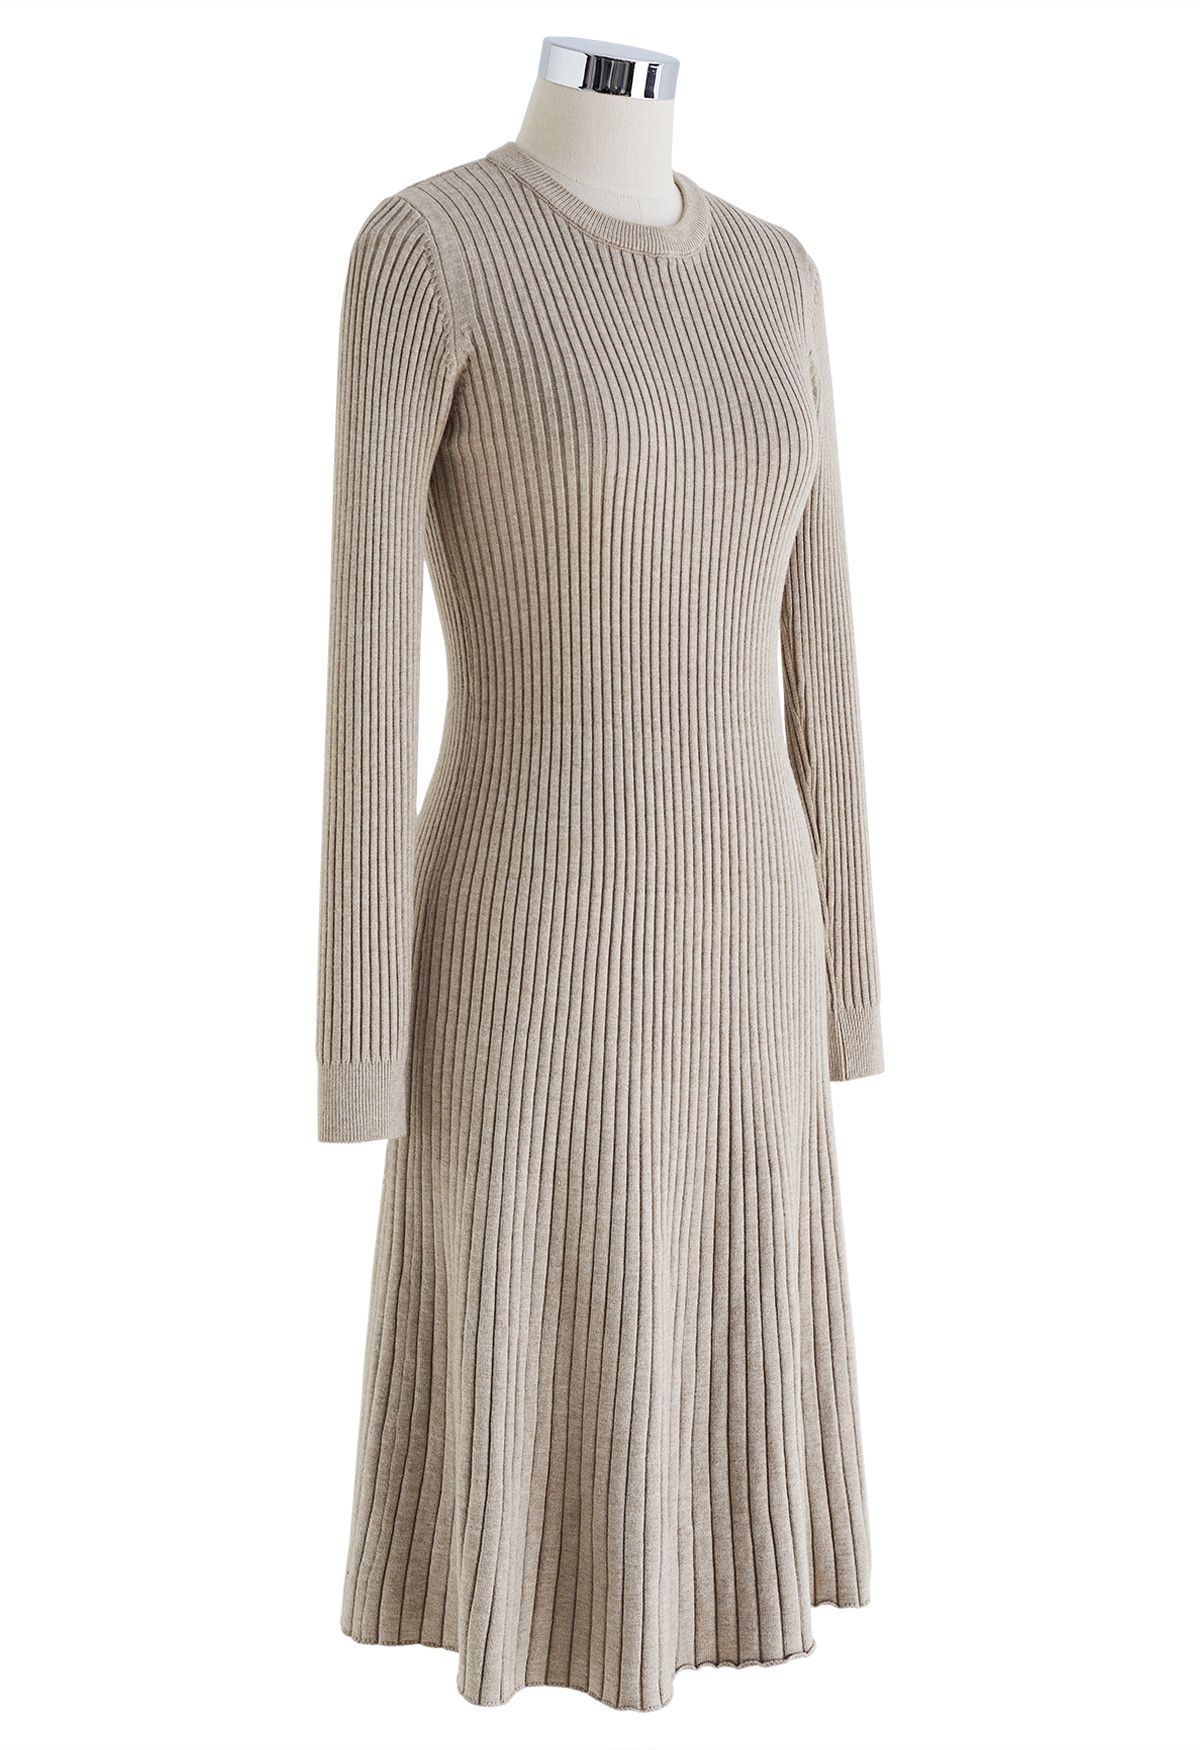 Ribbed Texture Frilling Midi Dress in Taupe